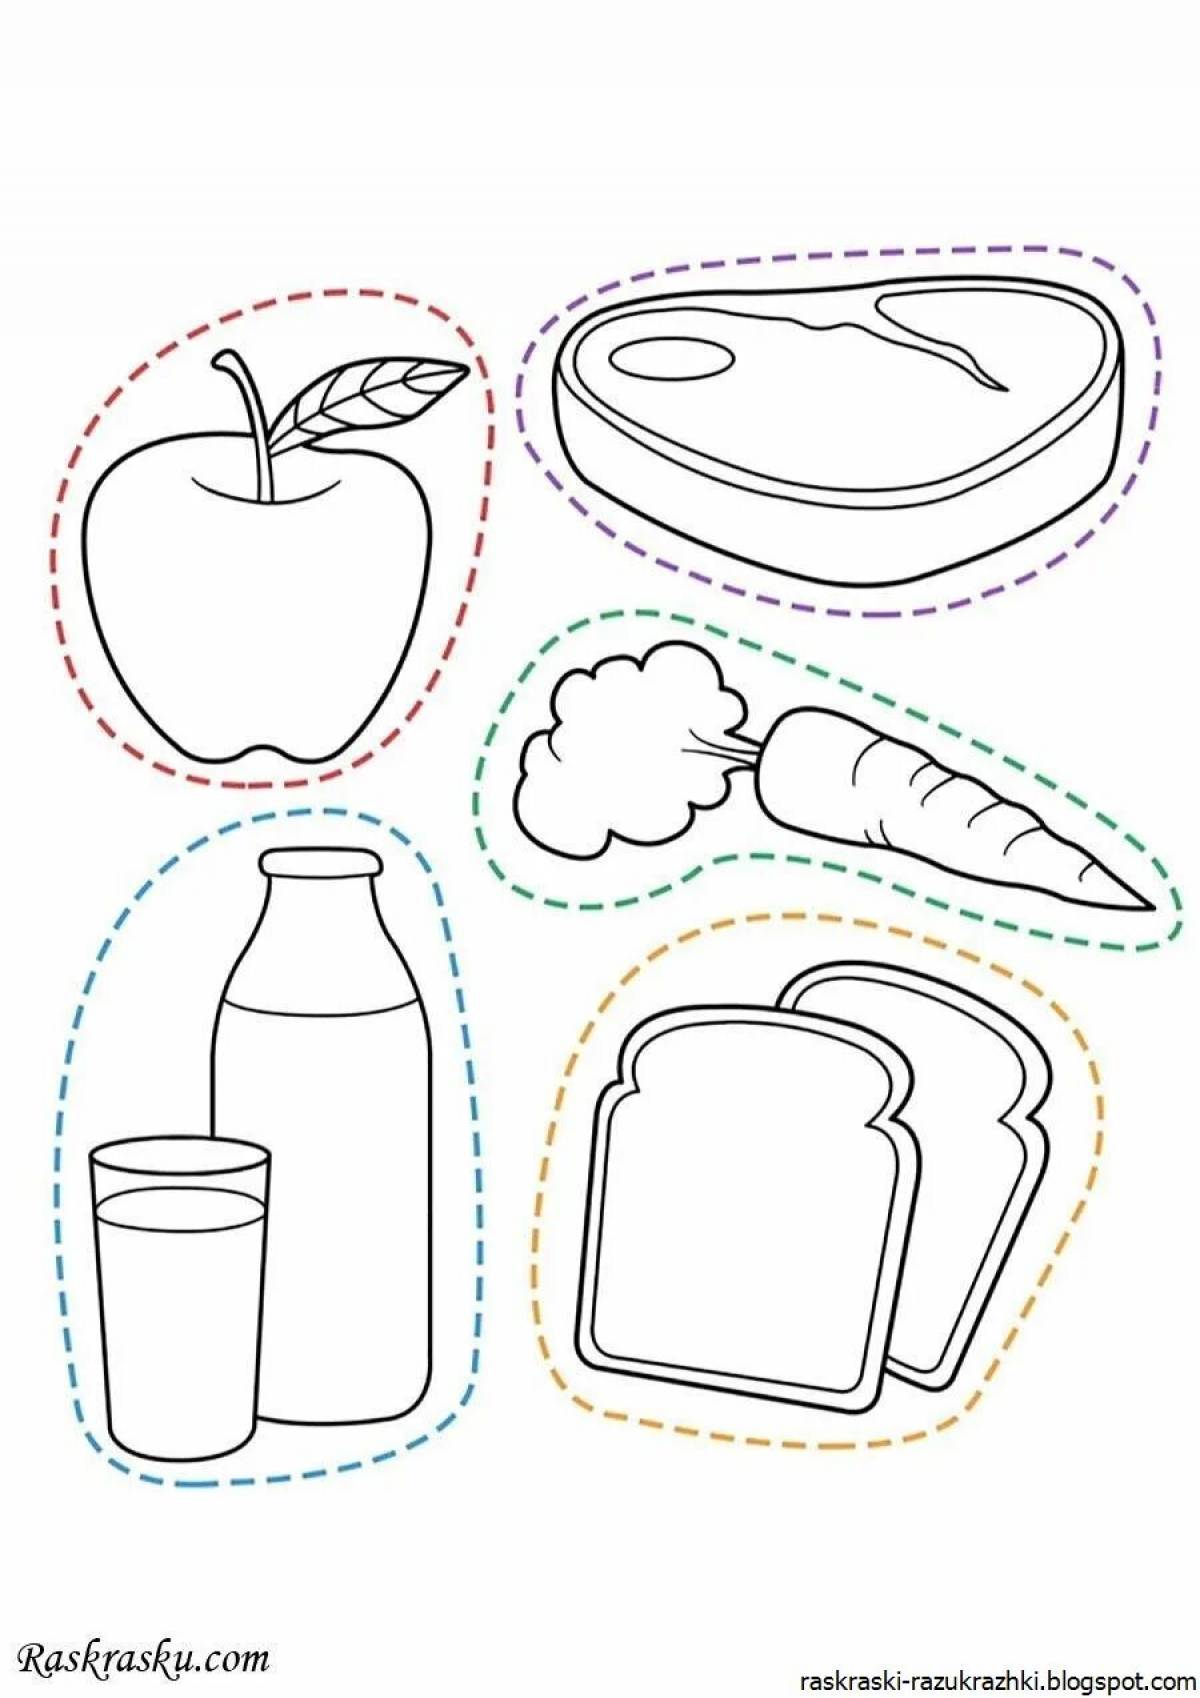 Exciting food coloring pages for the logo of a group of children 6-7 years old